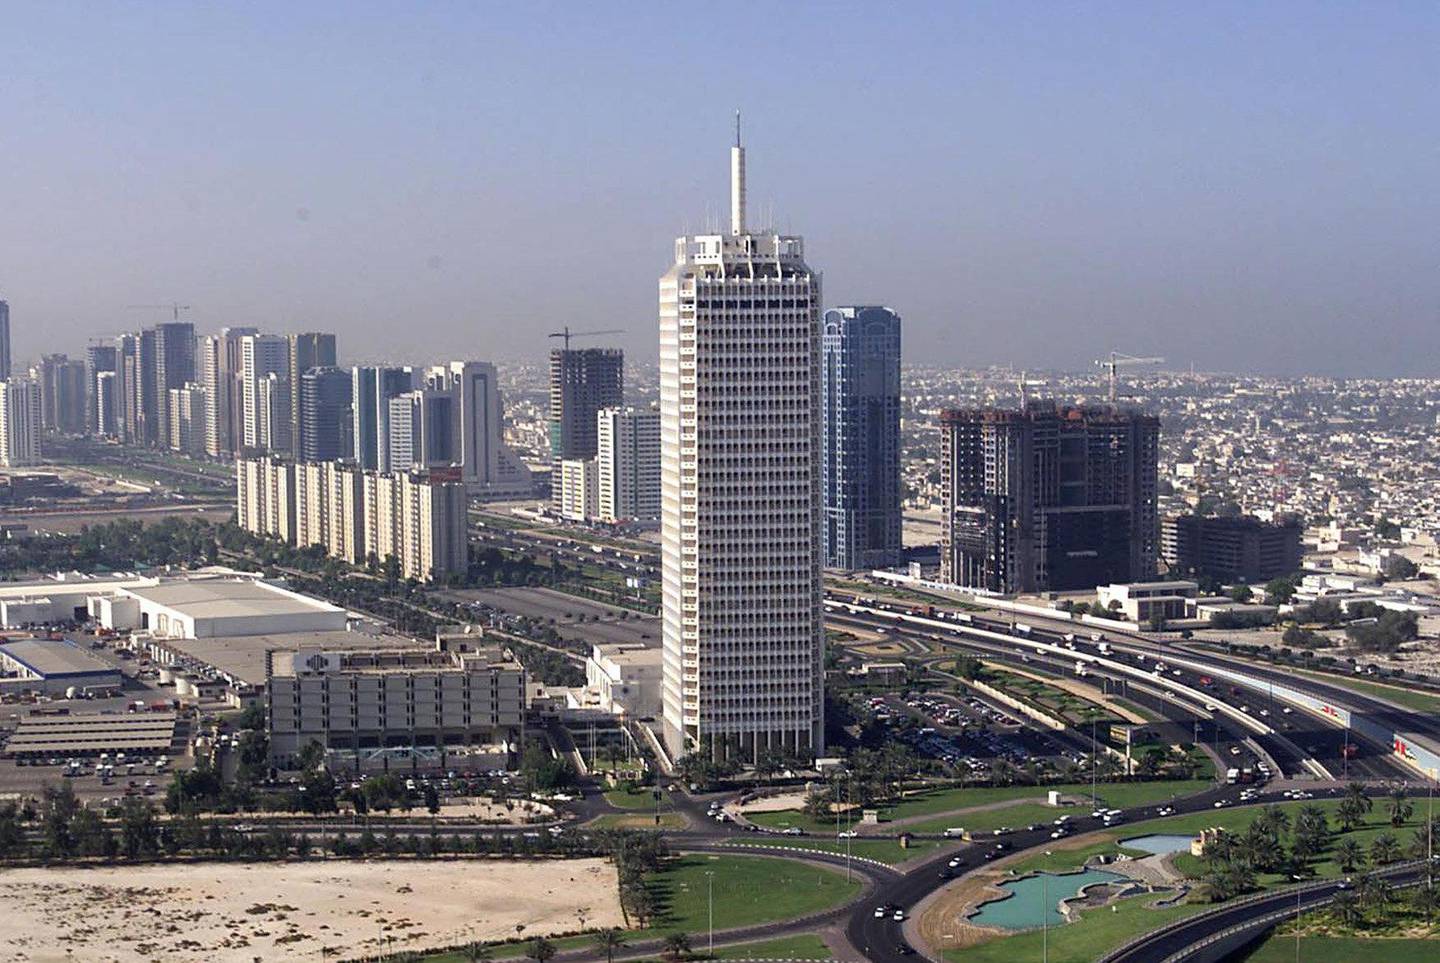 Aerial view of Dubai's World Trade Center (C) taken 12 November 1999. Oil was discovered in the emirate of Dubai in 1966 and its first oil exports three years later saw the trading town develop into a modern city with a population of around 800,000 people. (Electronic Image) (Photo by RABIH MOGHRABI / AFP)